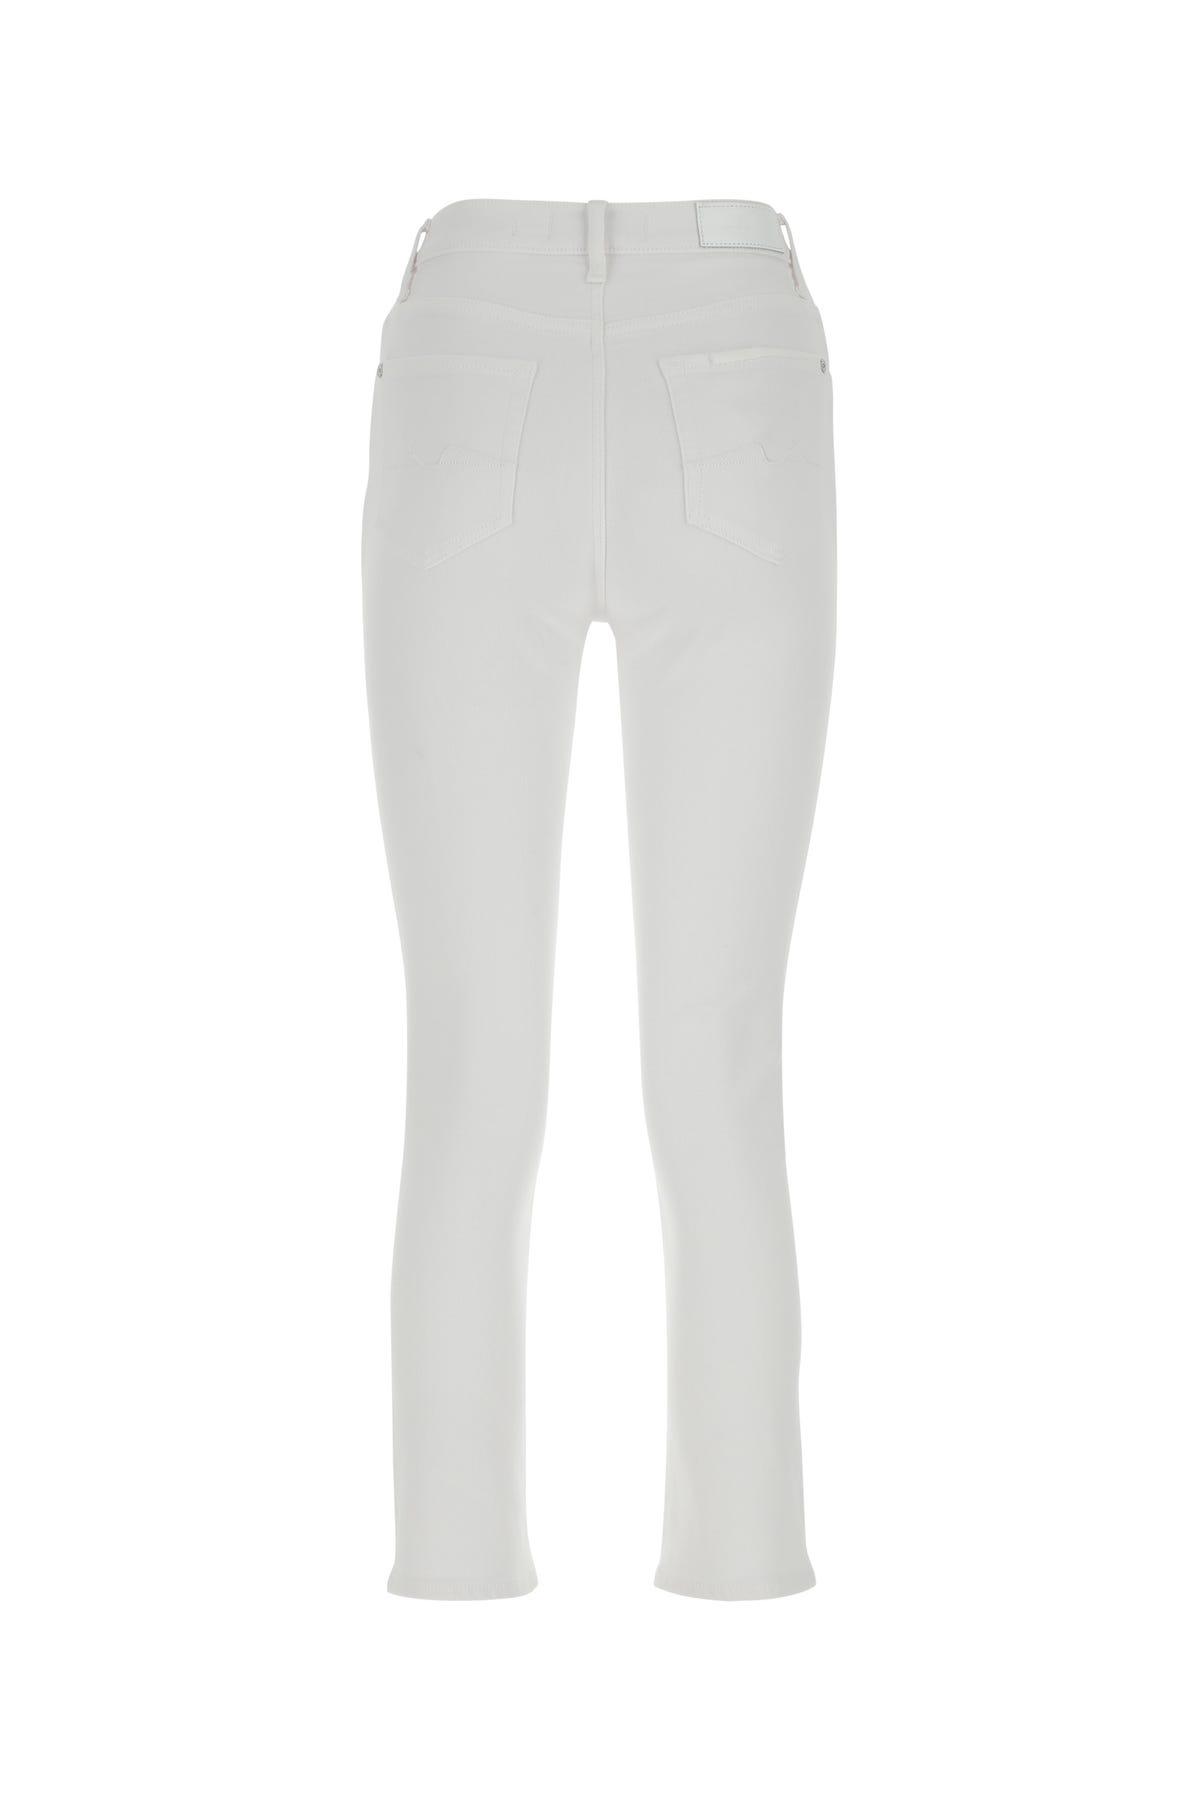 7 For All Mankind Jeans in White | Lyst